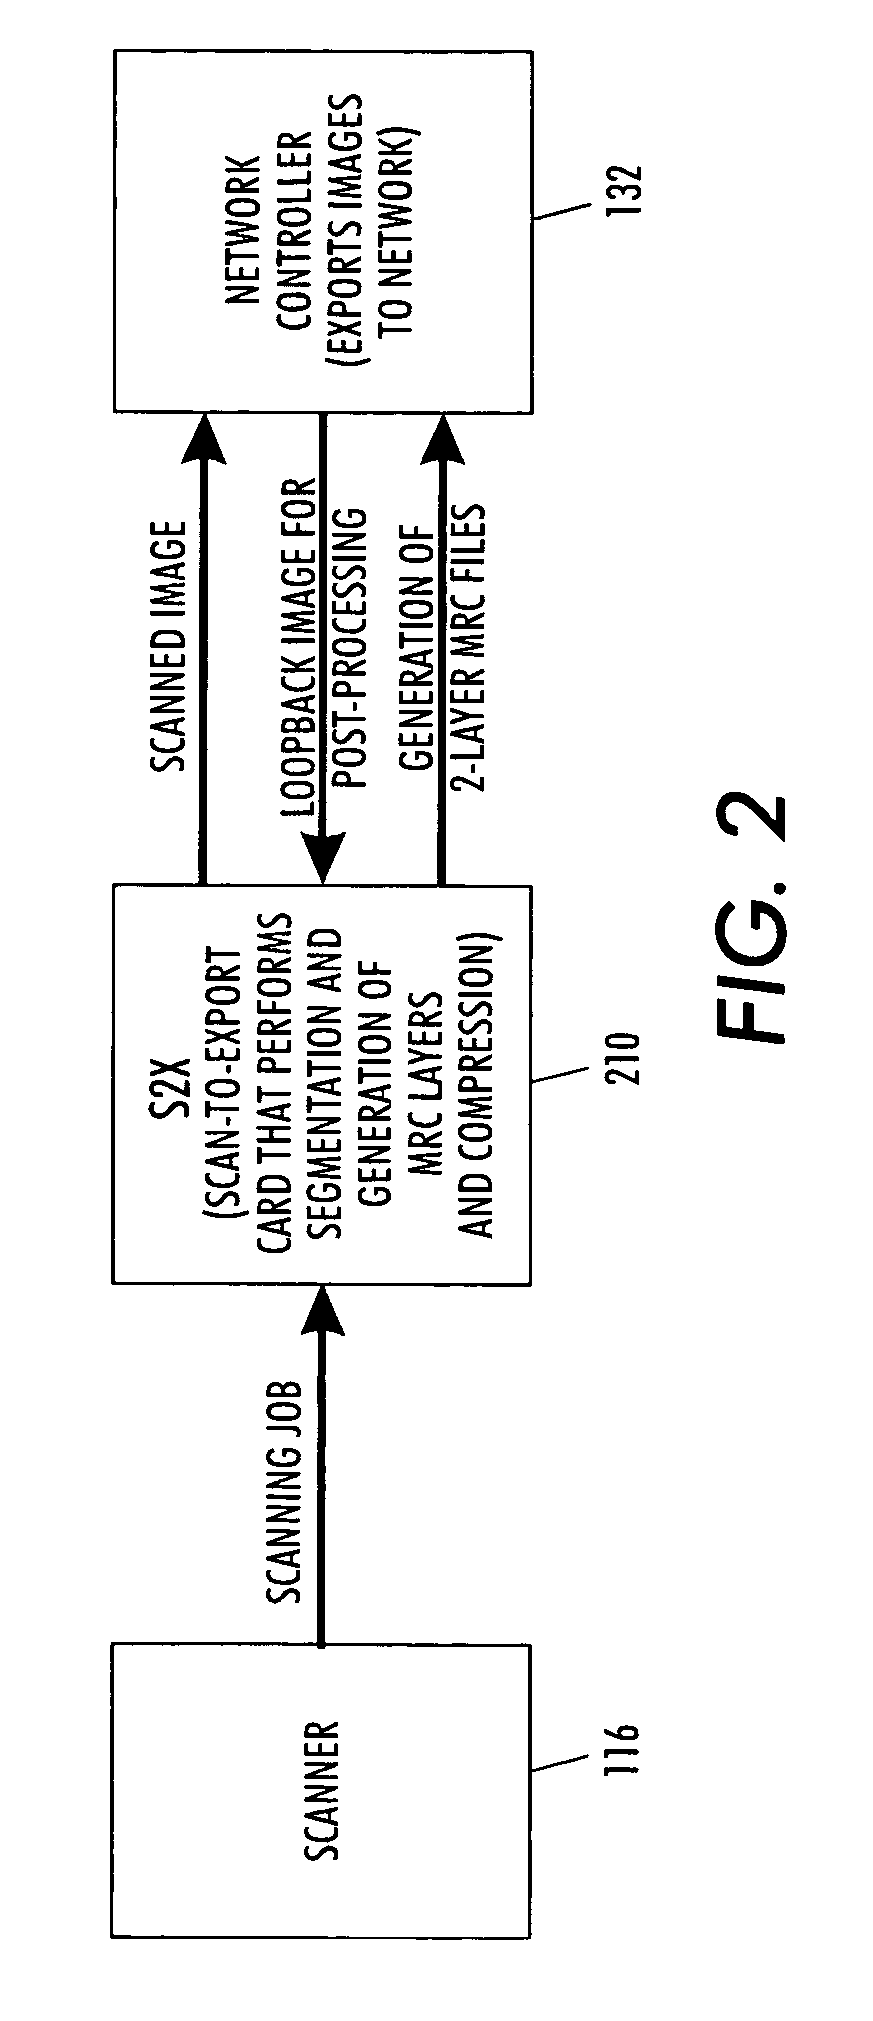 System and method for dynamic control of file size